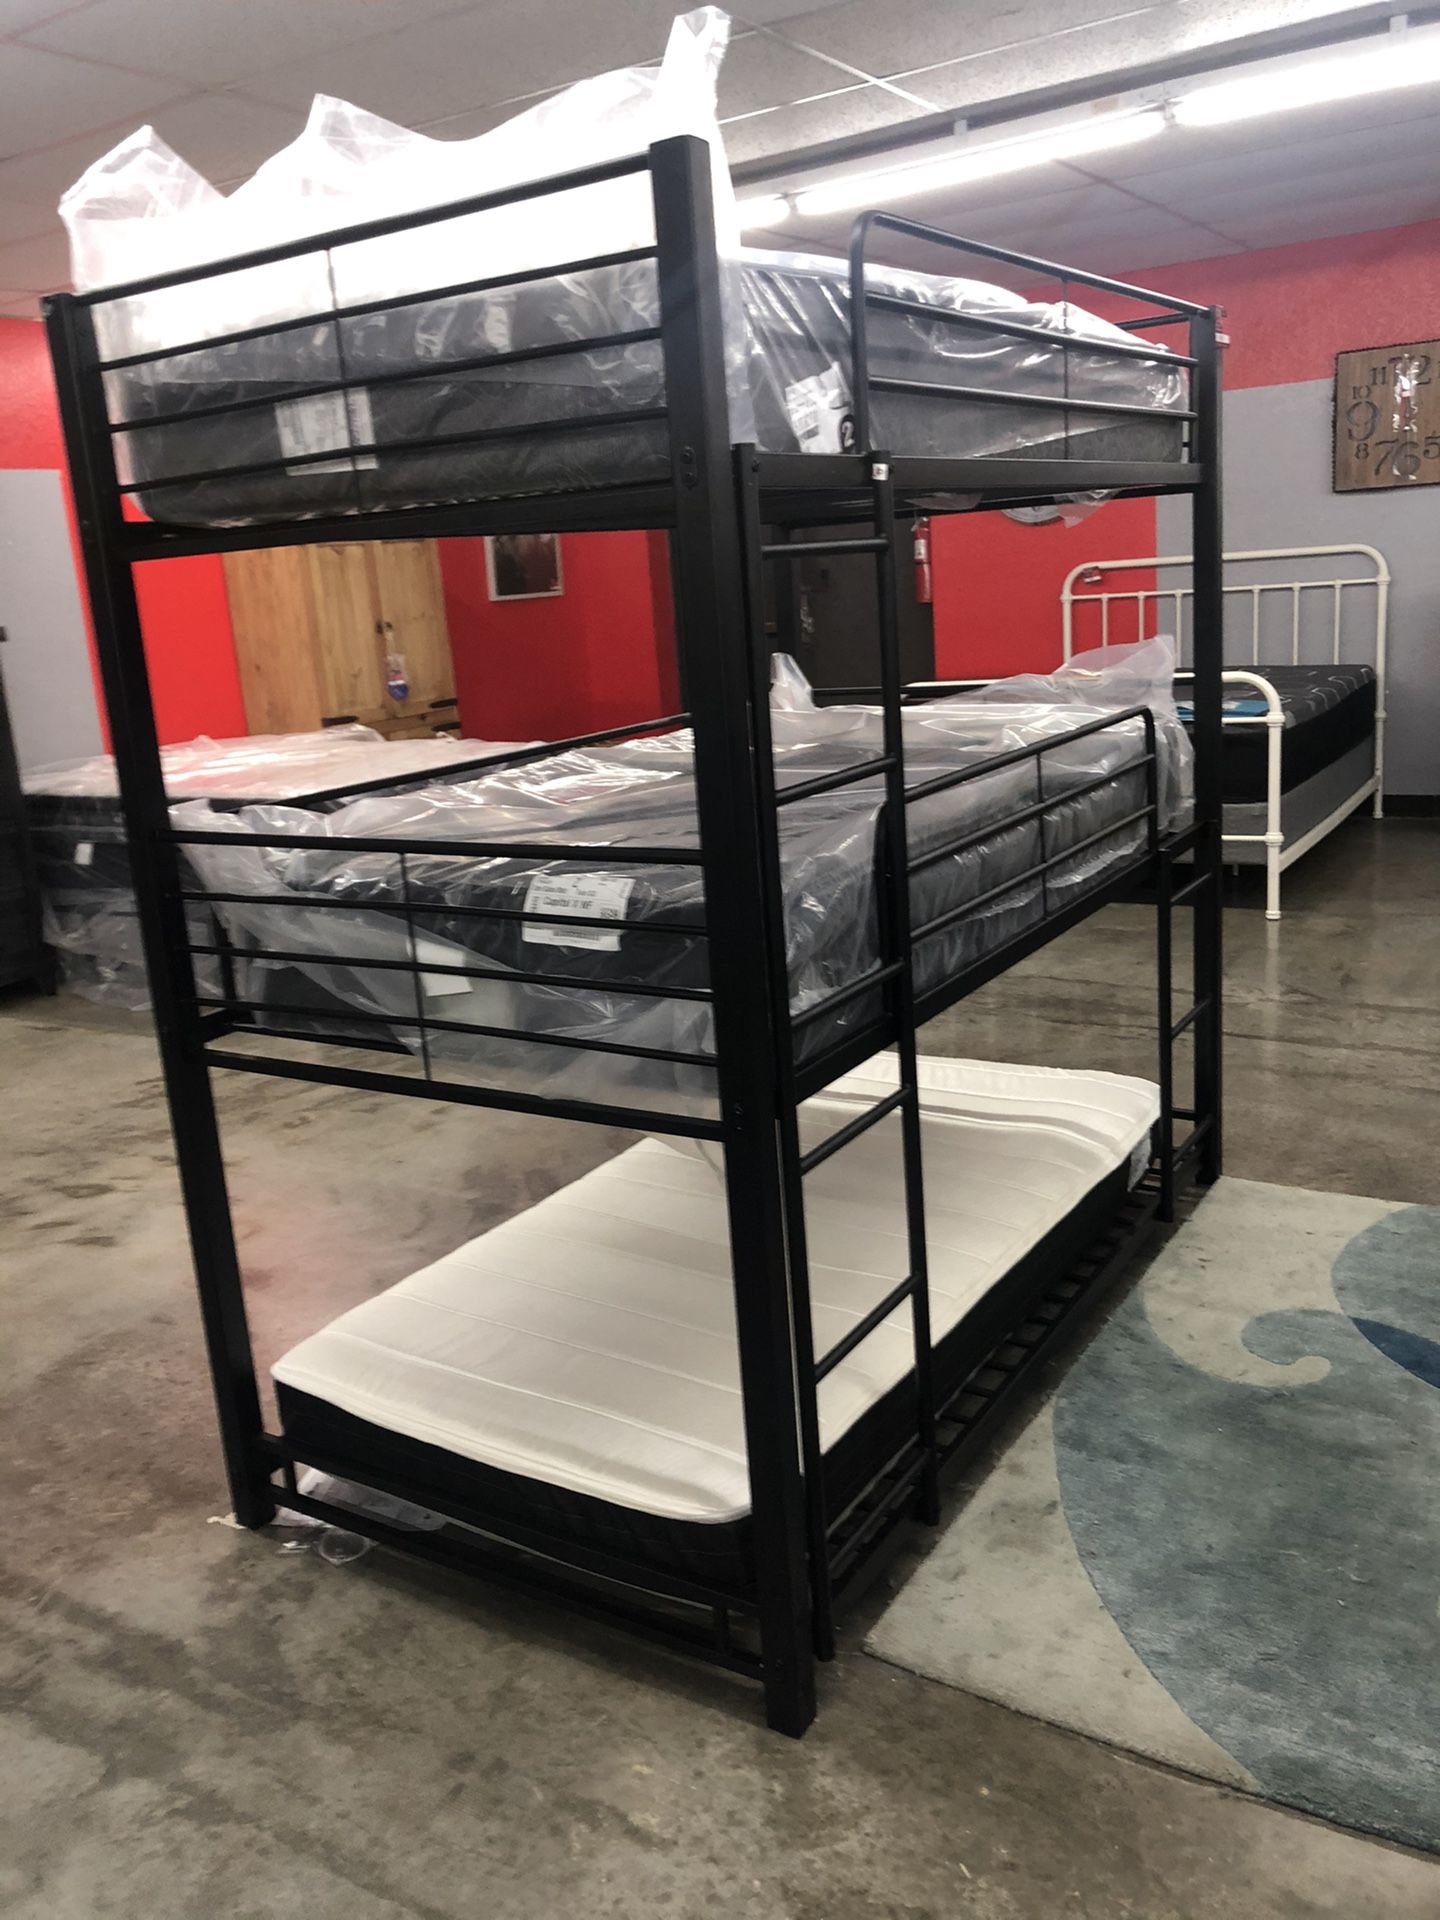 Twin Metal Triple Decker Bunk Bed On Sale Now!! $39 down Everyone Is Approved!  